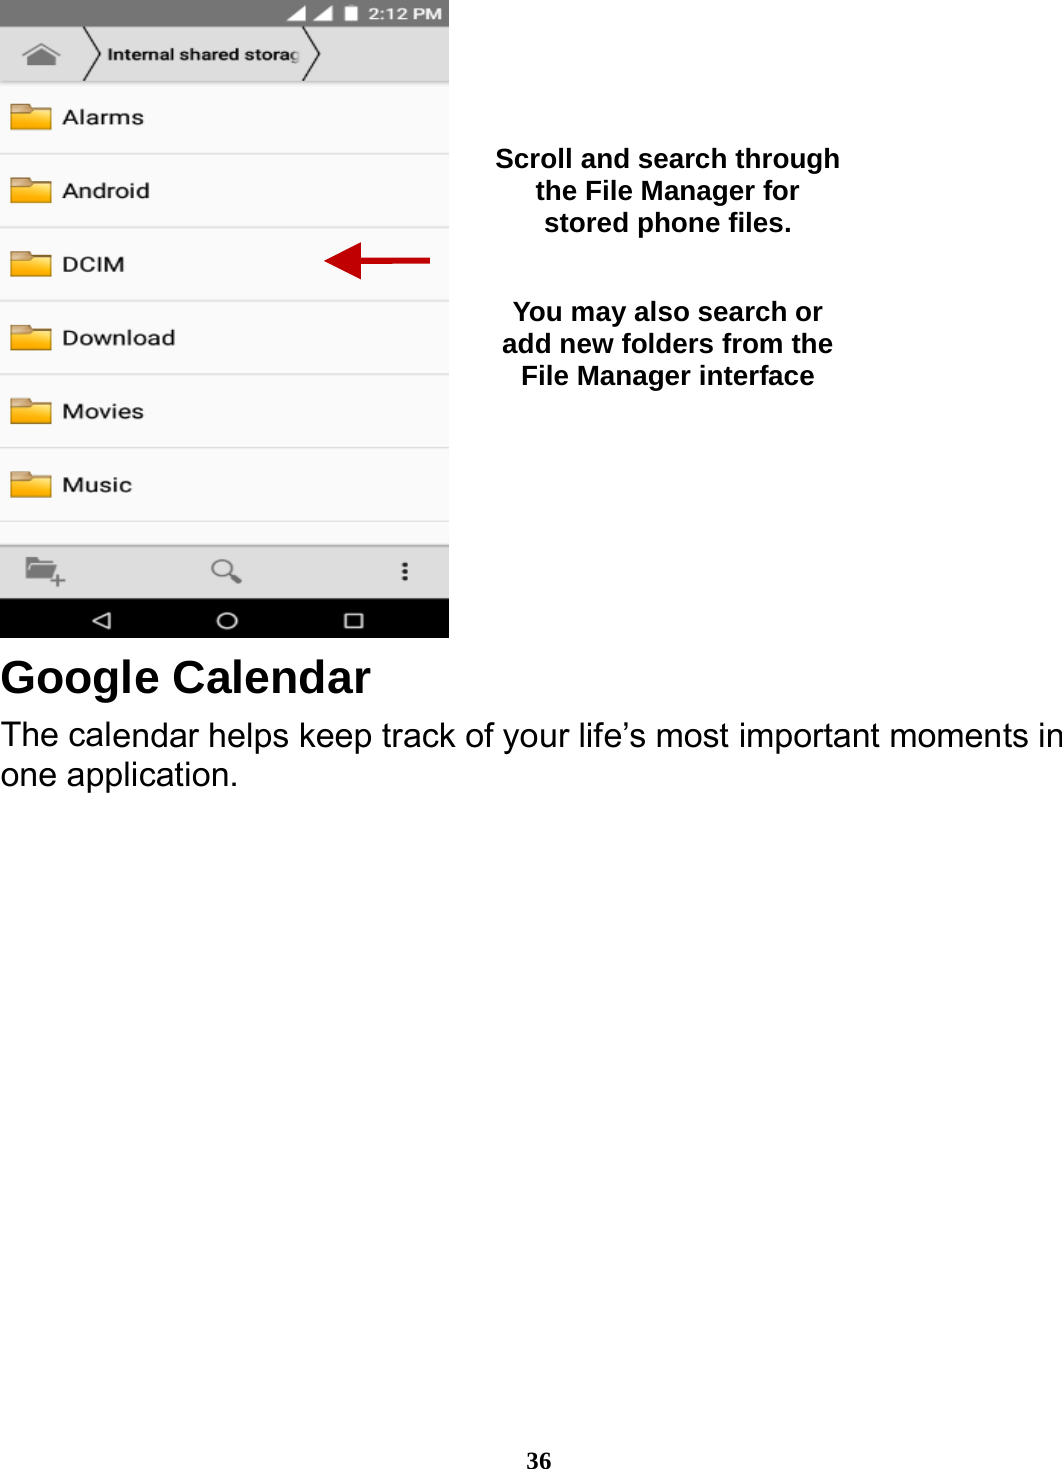  36  Google Calendar The calendar helps keep track of your life’s most important moments in one application.   Scroll and search through the File Manager for stored phone files.  You may also search or add new folders from the File Manager interface 